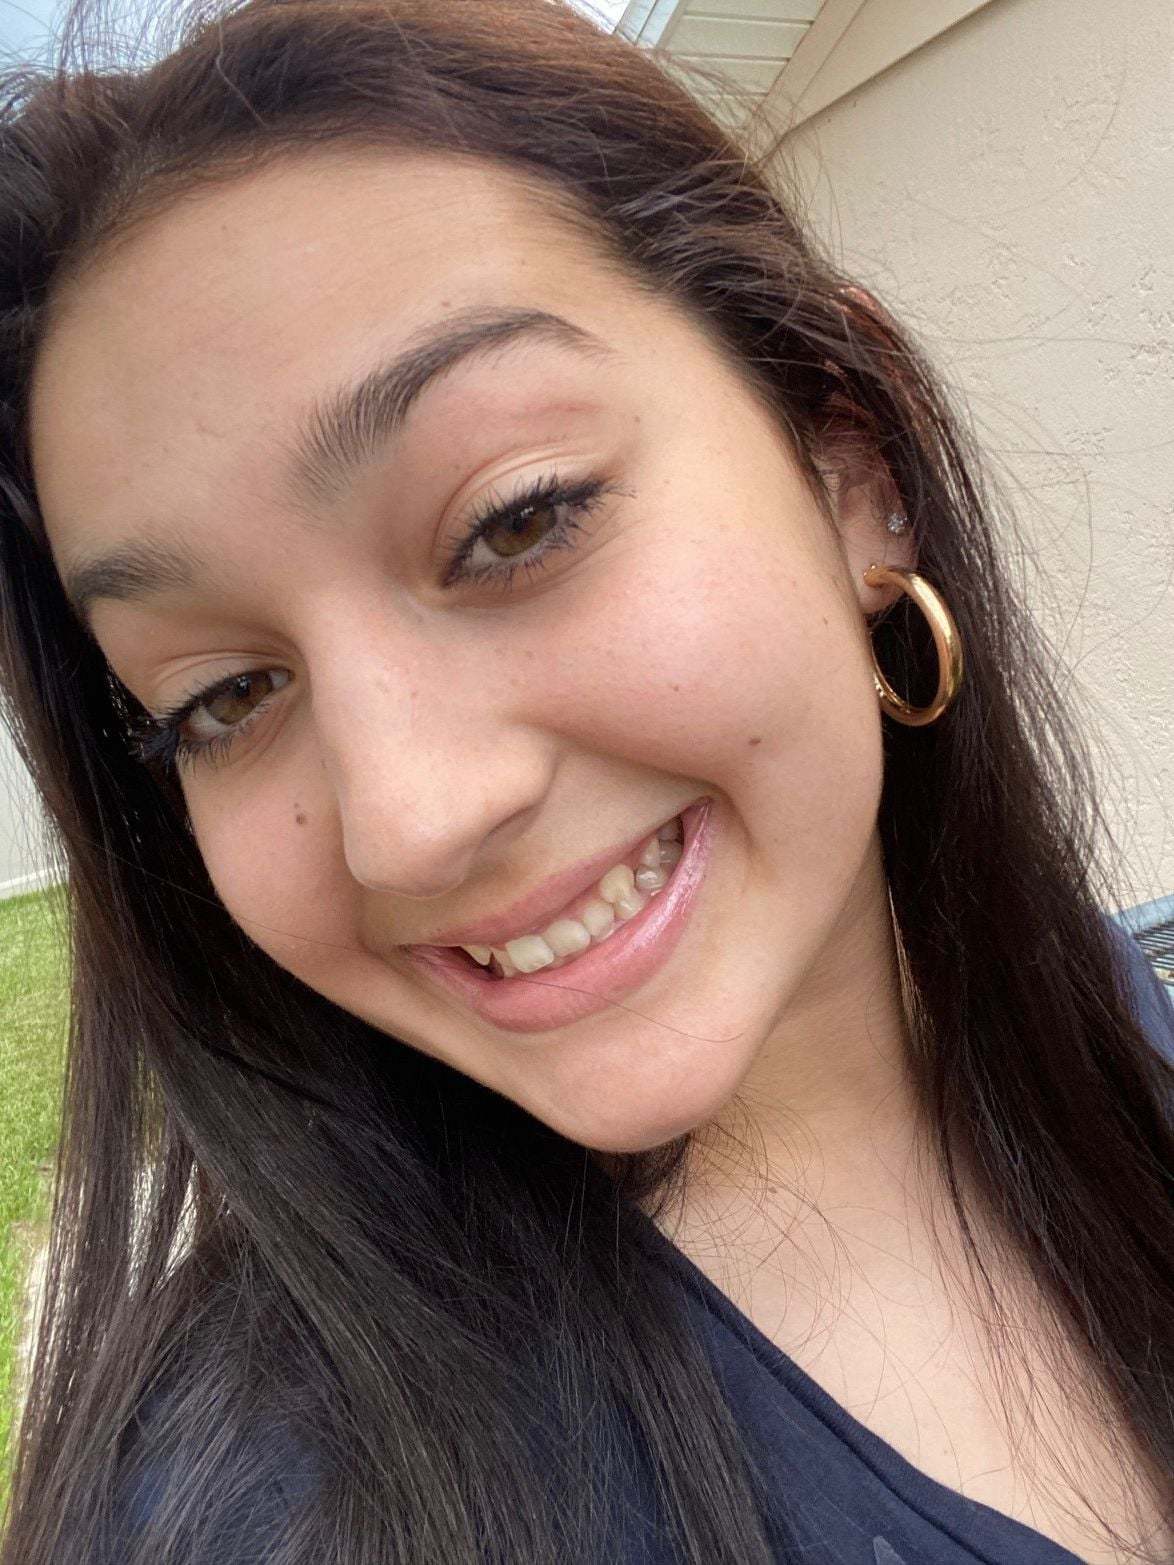 Mia Alice Vail, a student at Seabreeze High School, is described as five feet, eight inches tall, with brown eyes and black hair. Courtesy photo